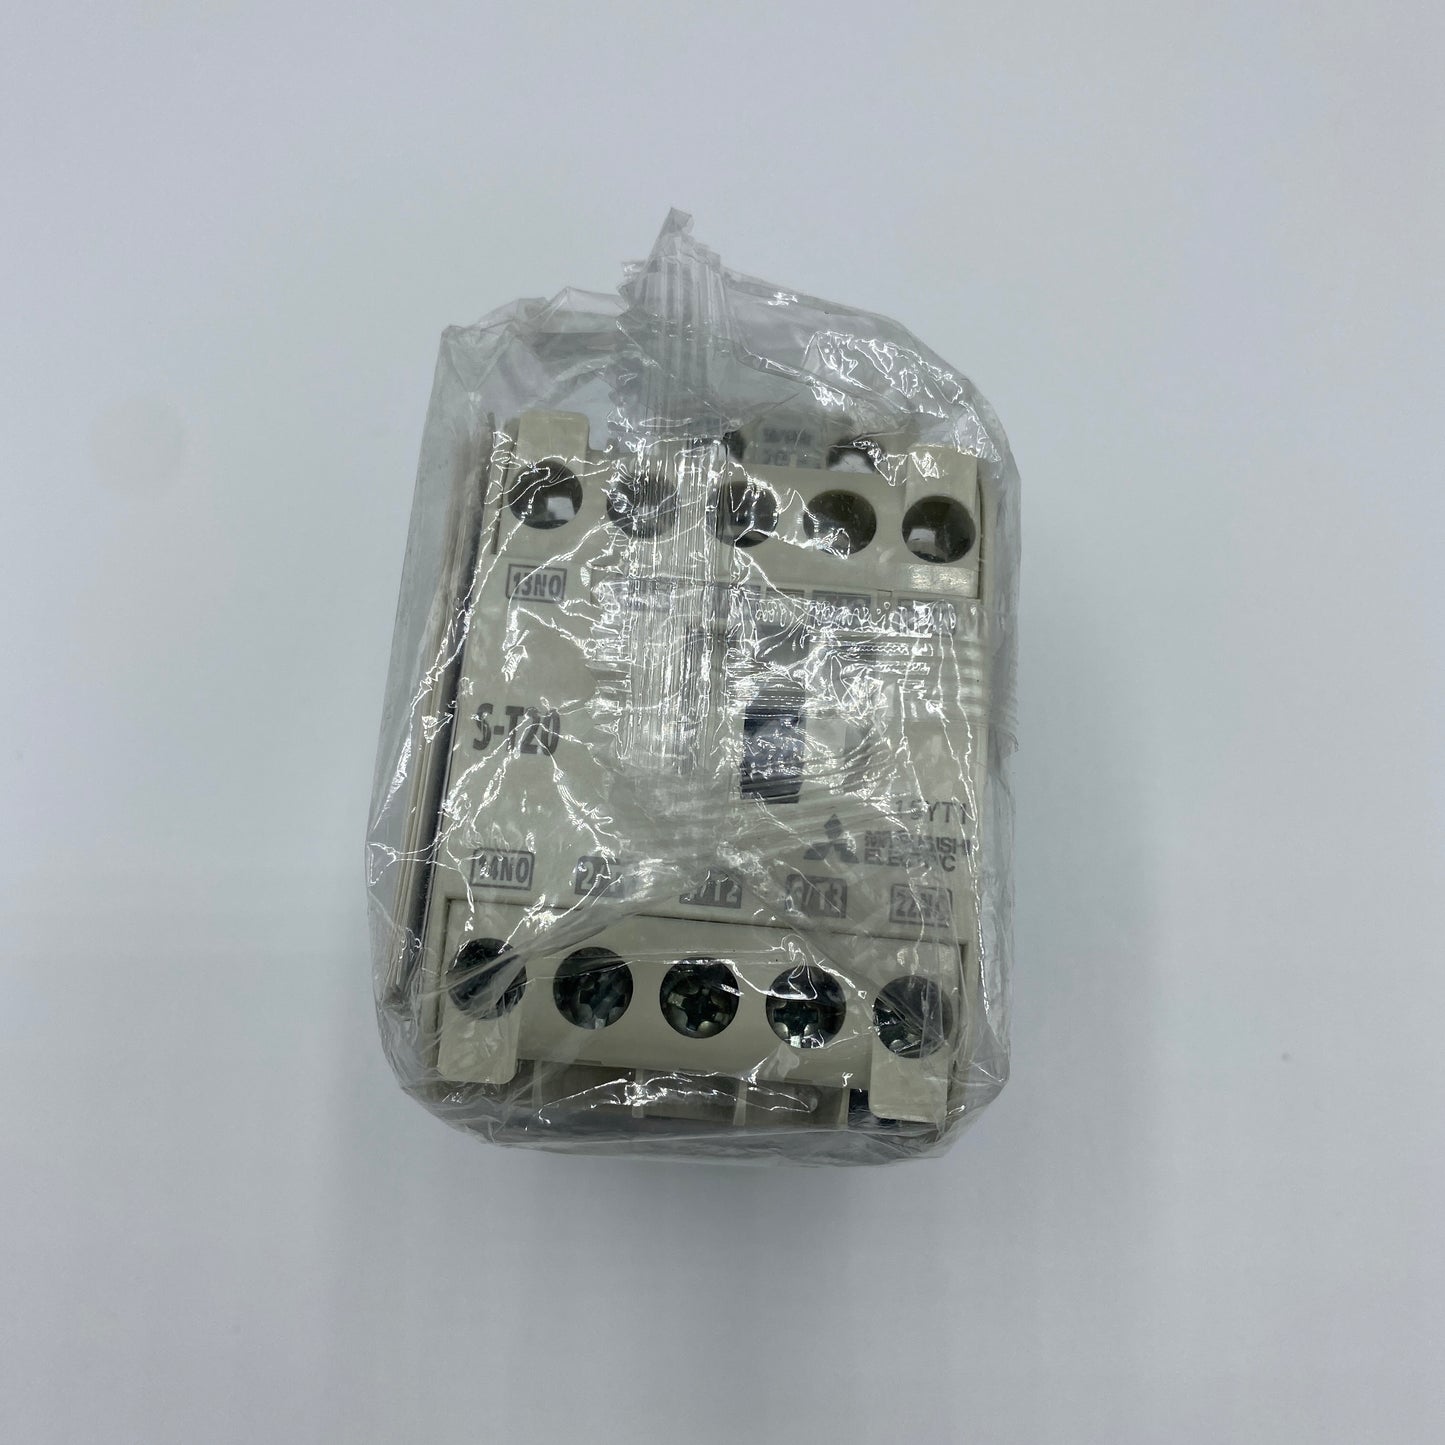 Mitsubishi Electric S-T20 Electromagnetic Contactor